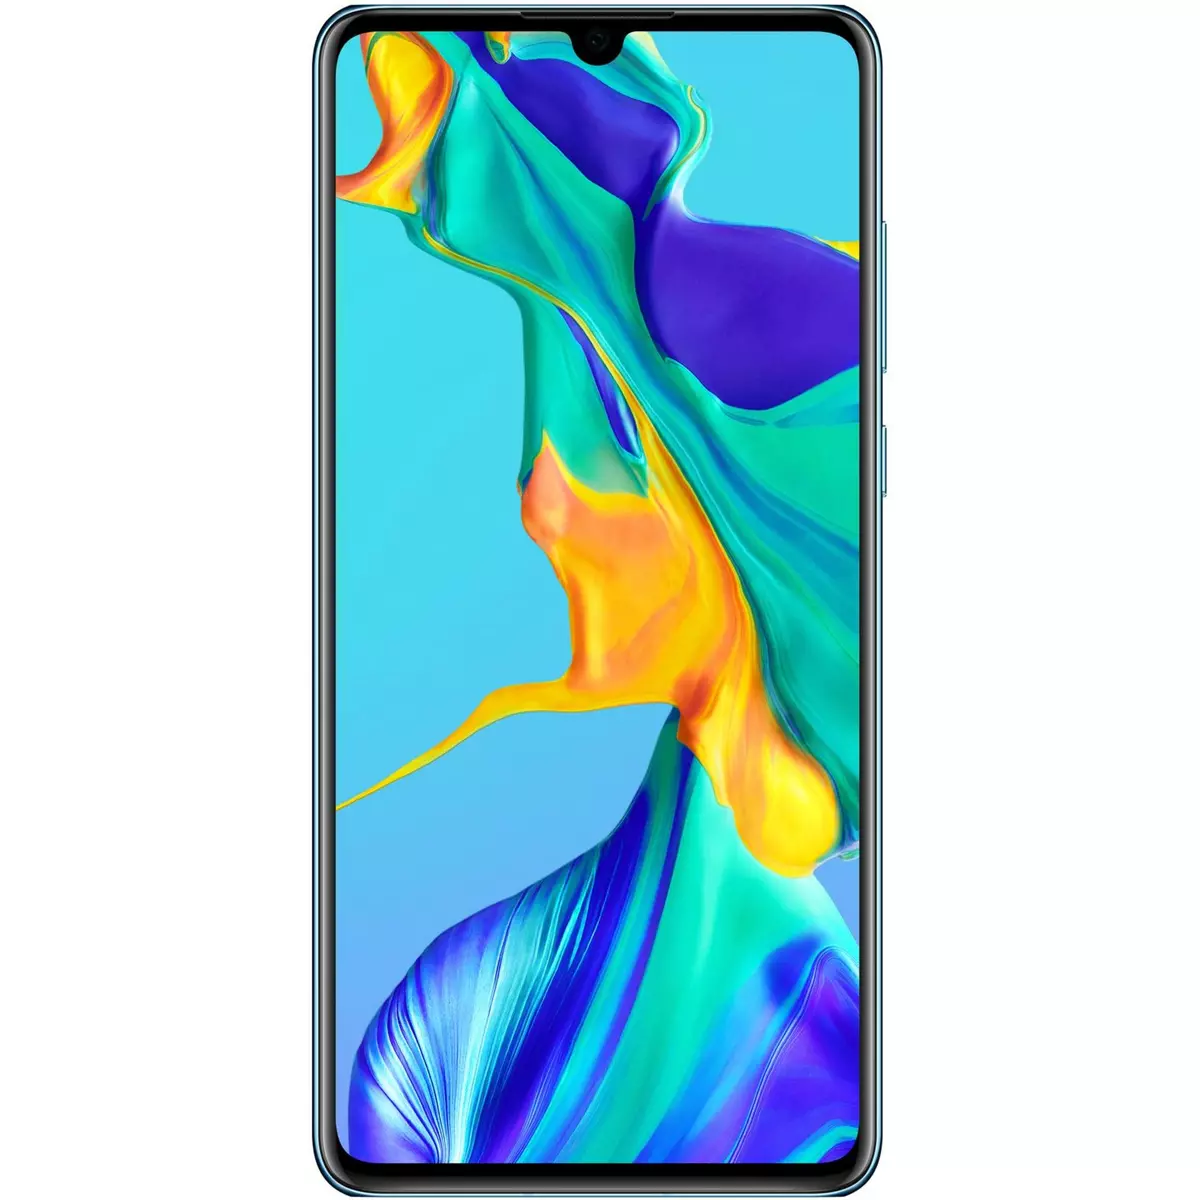 HUAWEI Smartphone - P30 - 128 Go - 6.1 pouces - Crystal - 4G - Double SIM